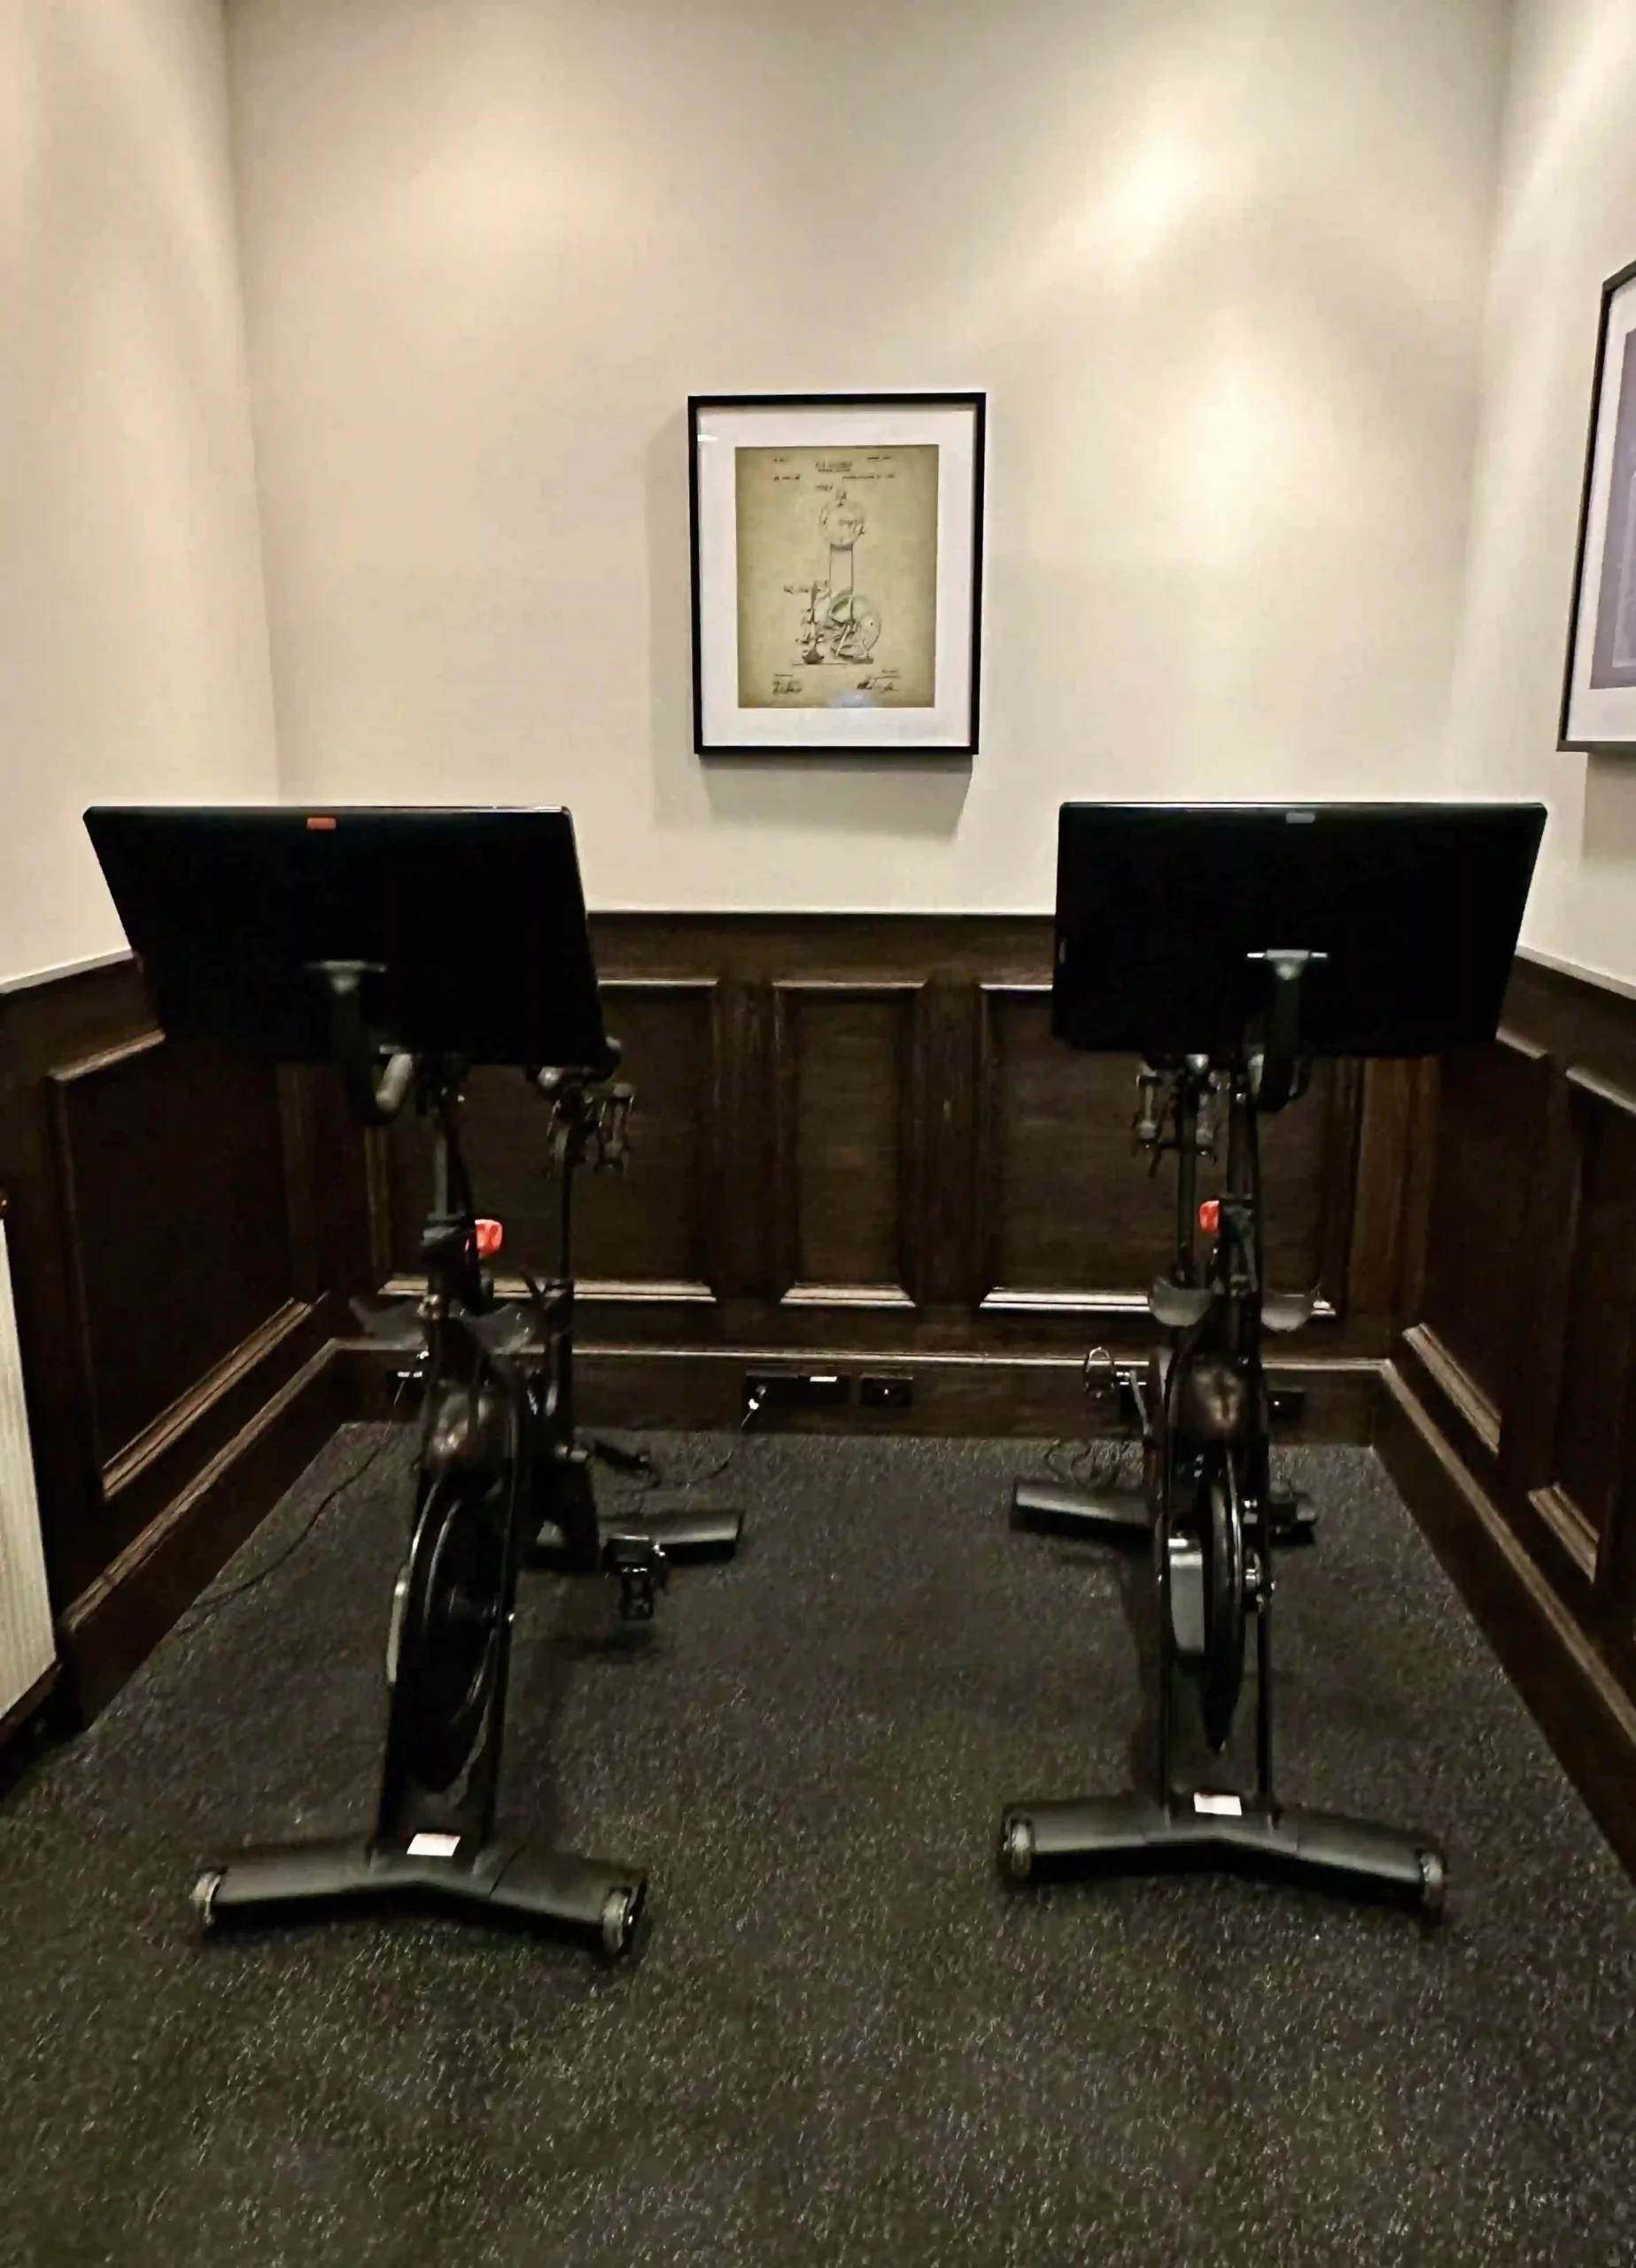 exercise bikes in a room